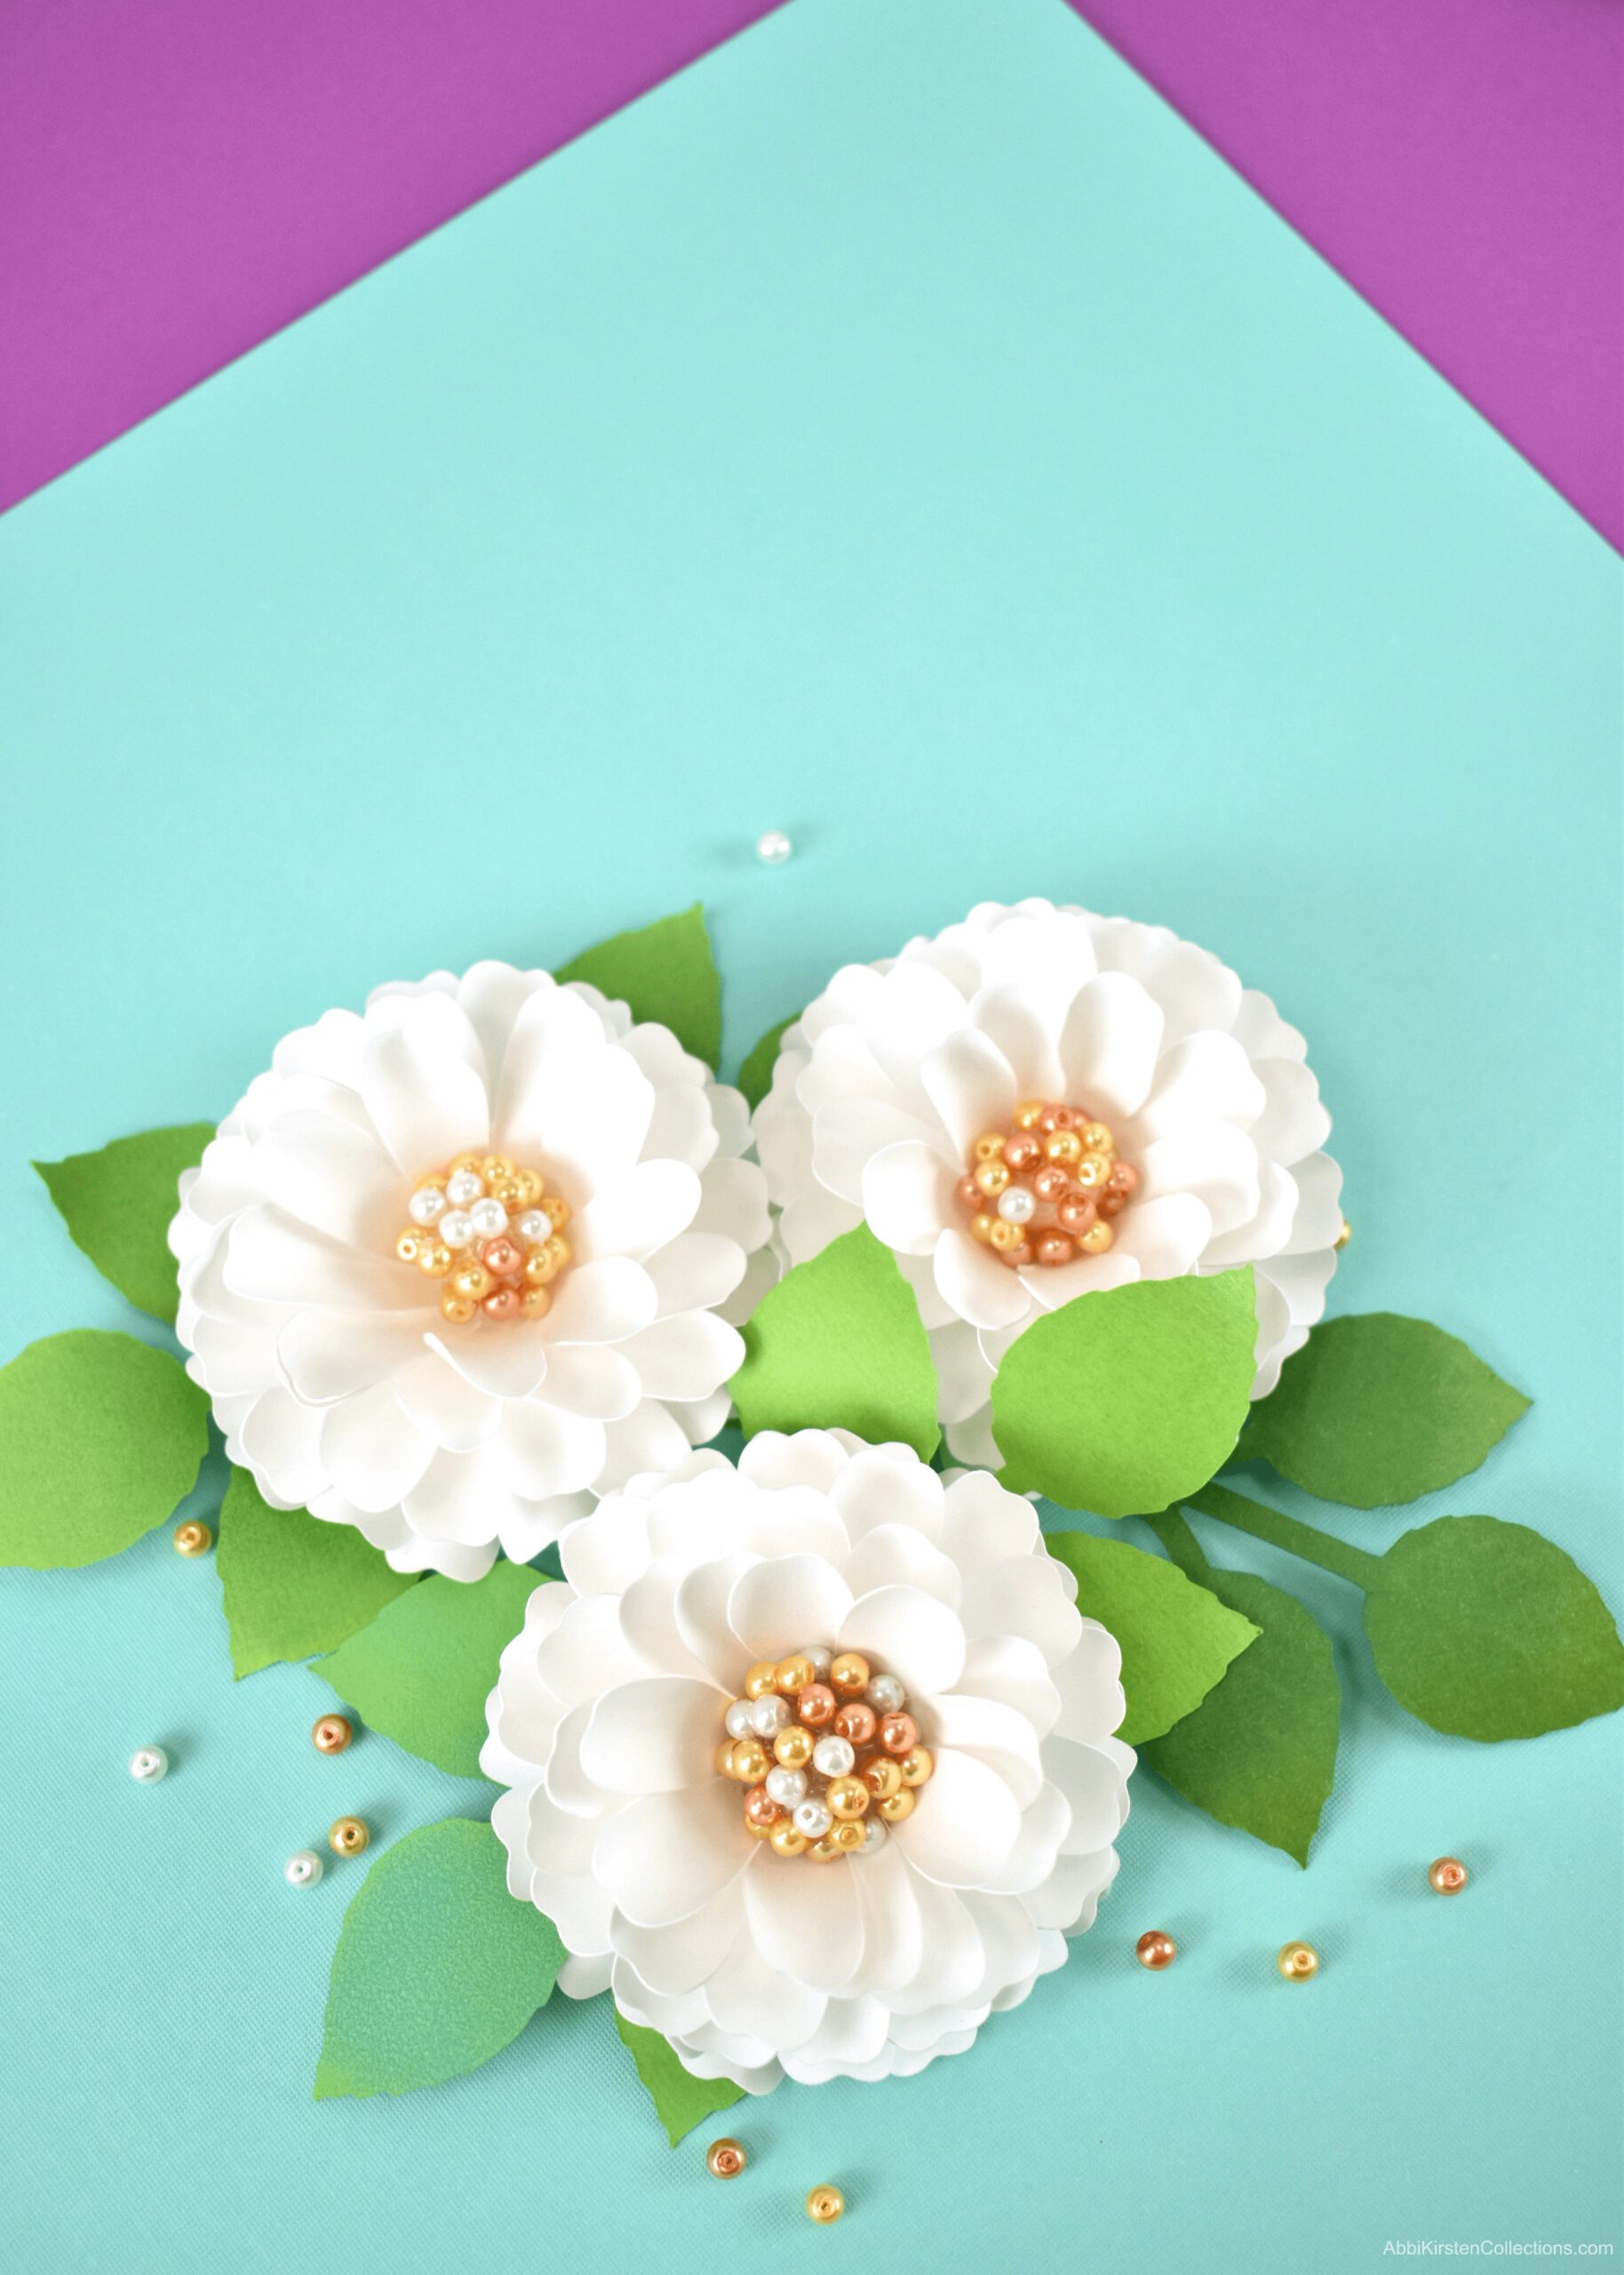 Three small white paper dahlia flowers with pearl centers. Each flower has small green leaves.